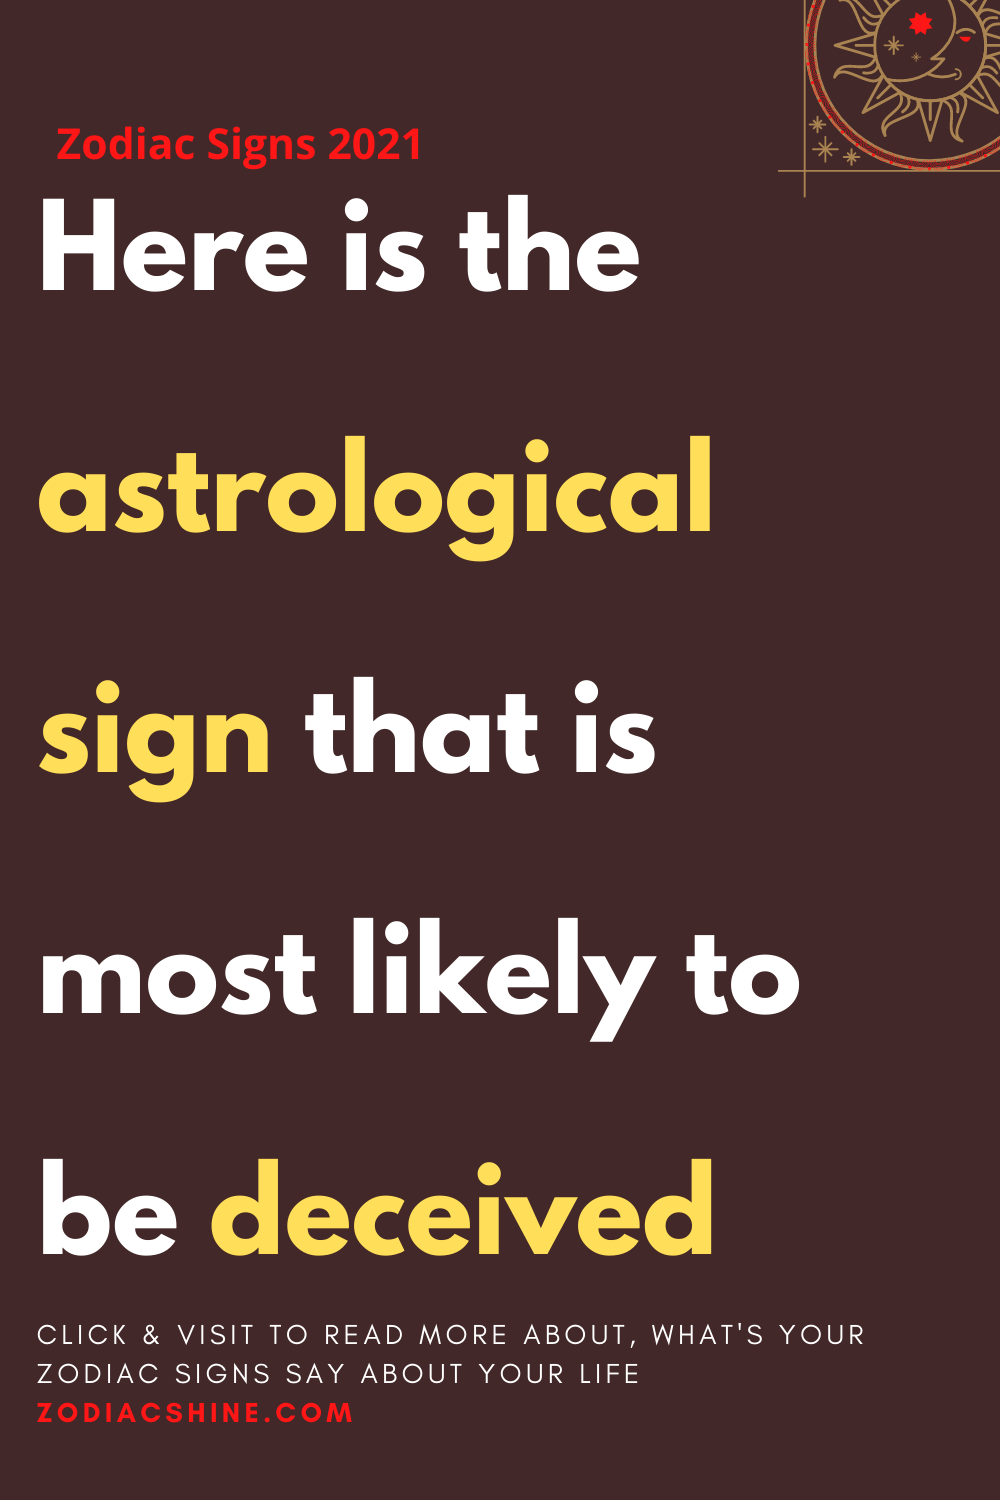 Here is the astrological sign that is most likely to be deceived